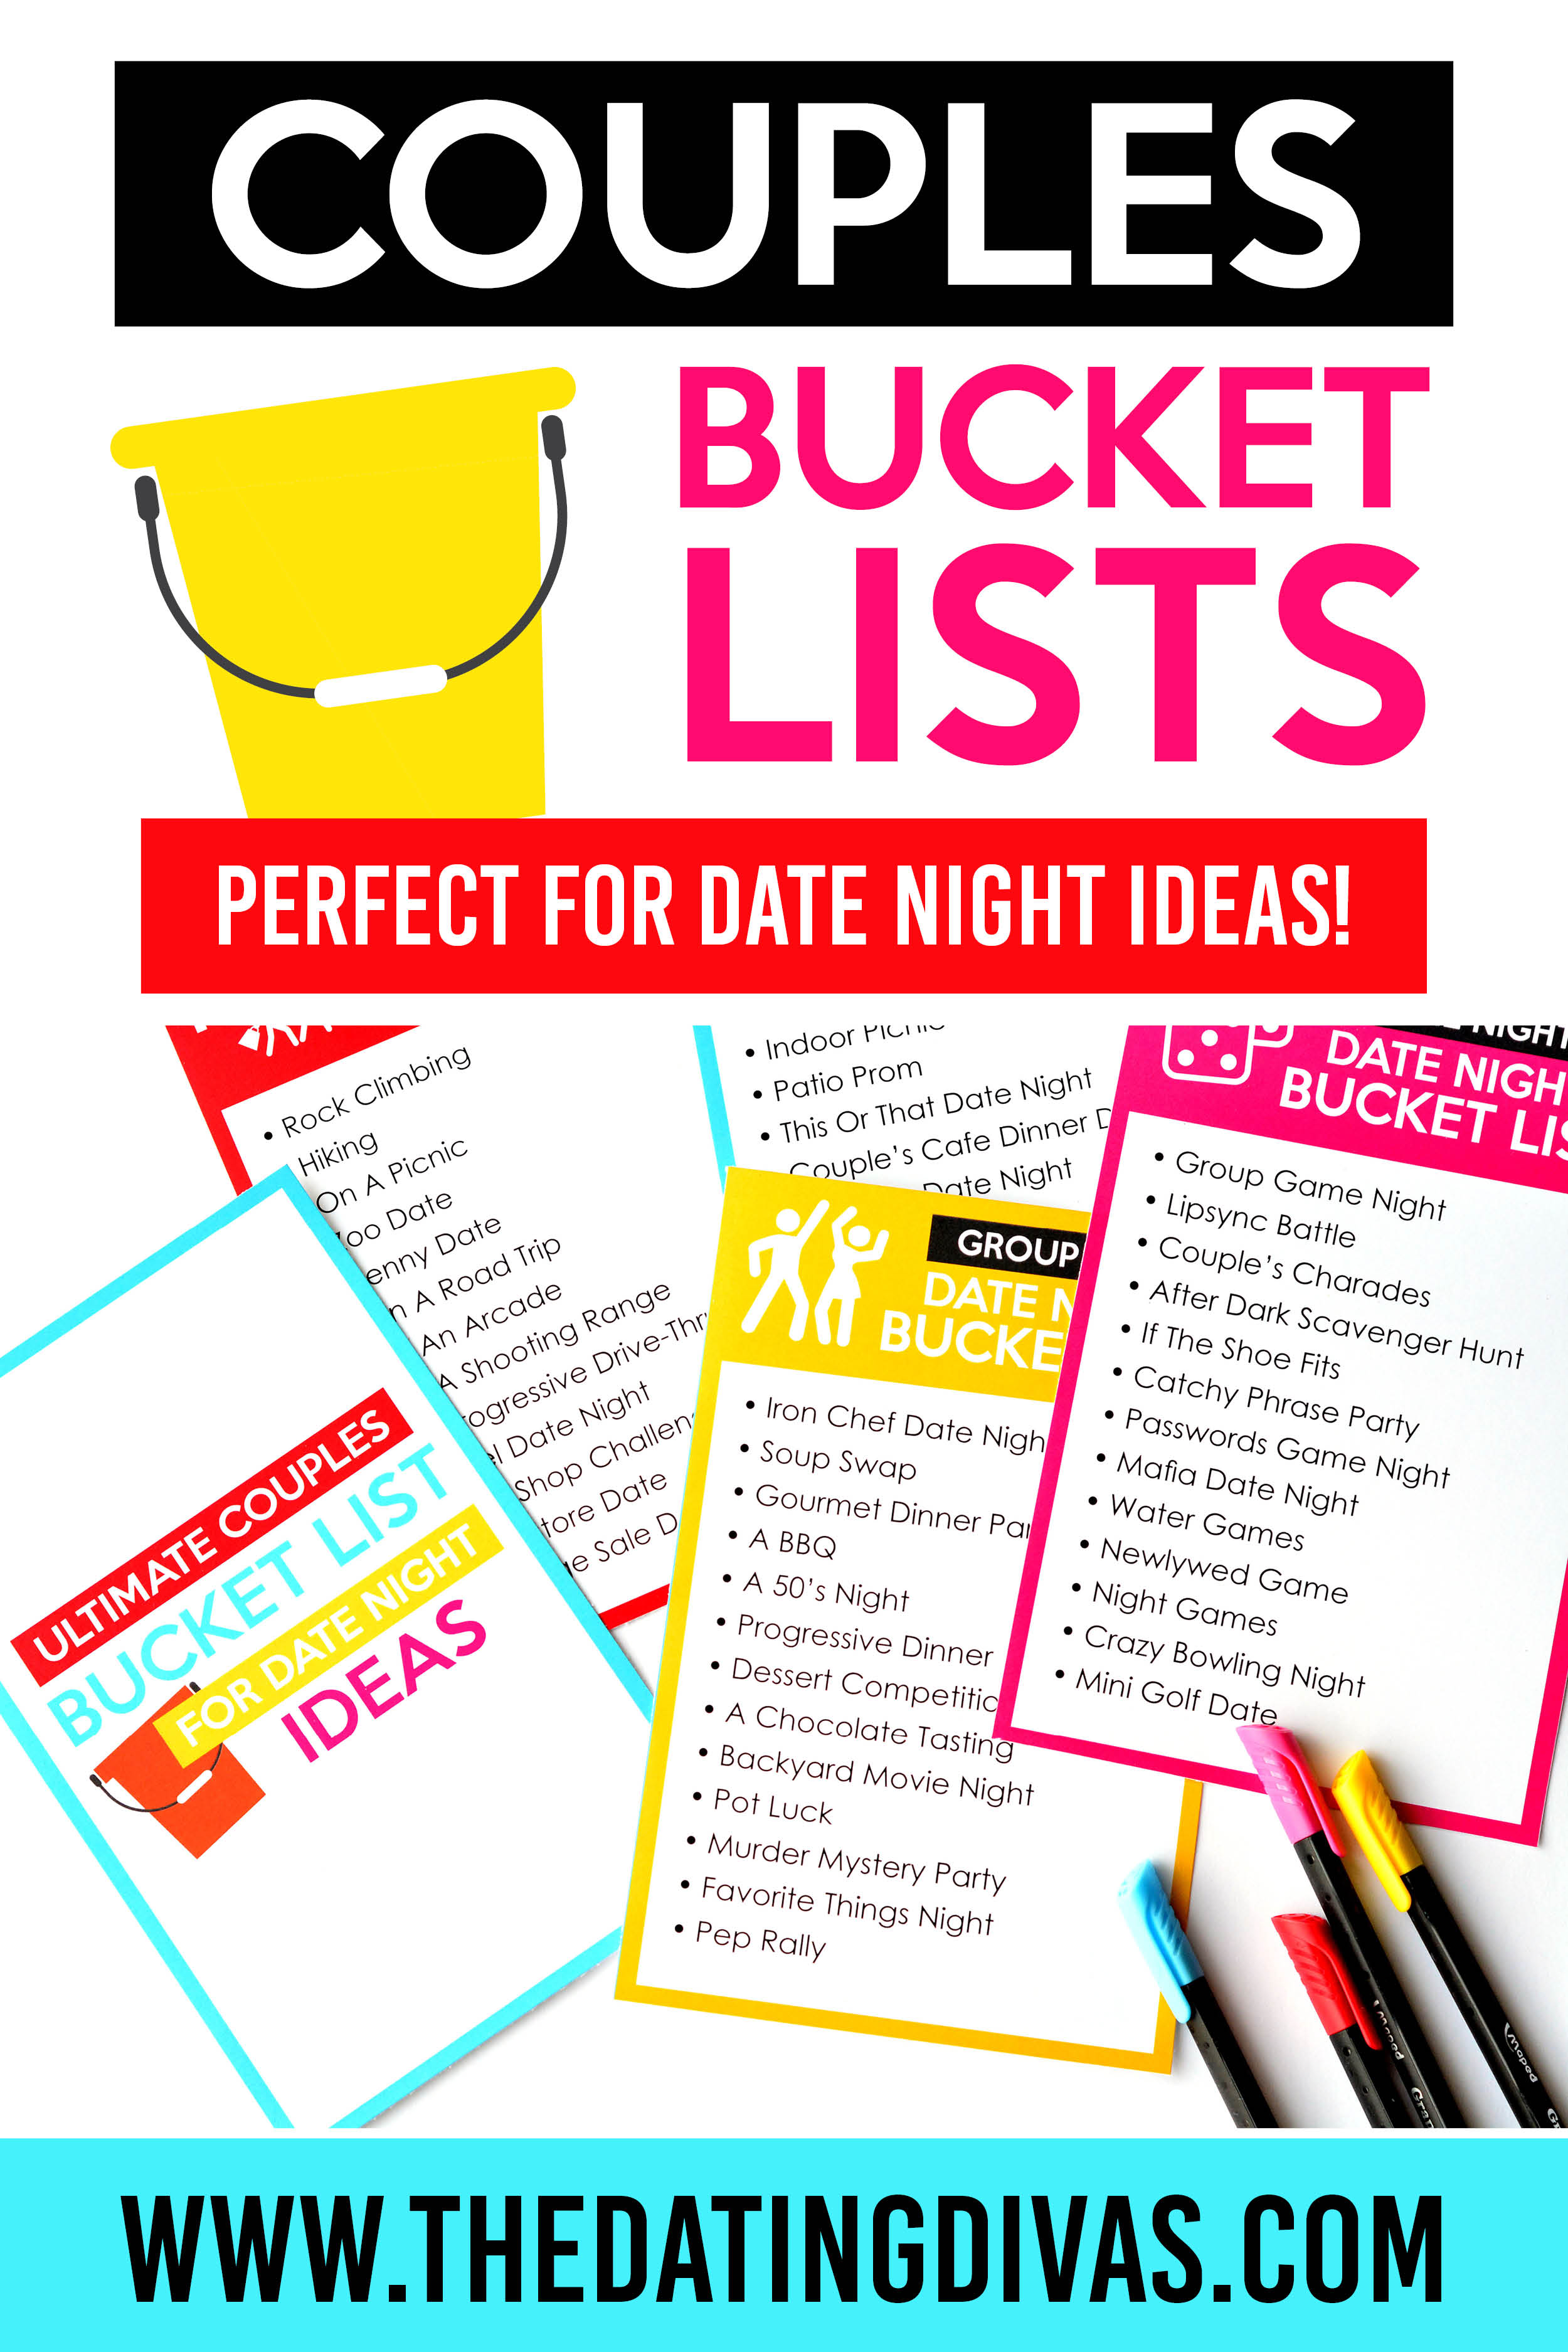 The Couples Bucket List Book 2-in-1 Photo Album 101 Unique Date Night Ideas and Activities for Couples